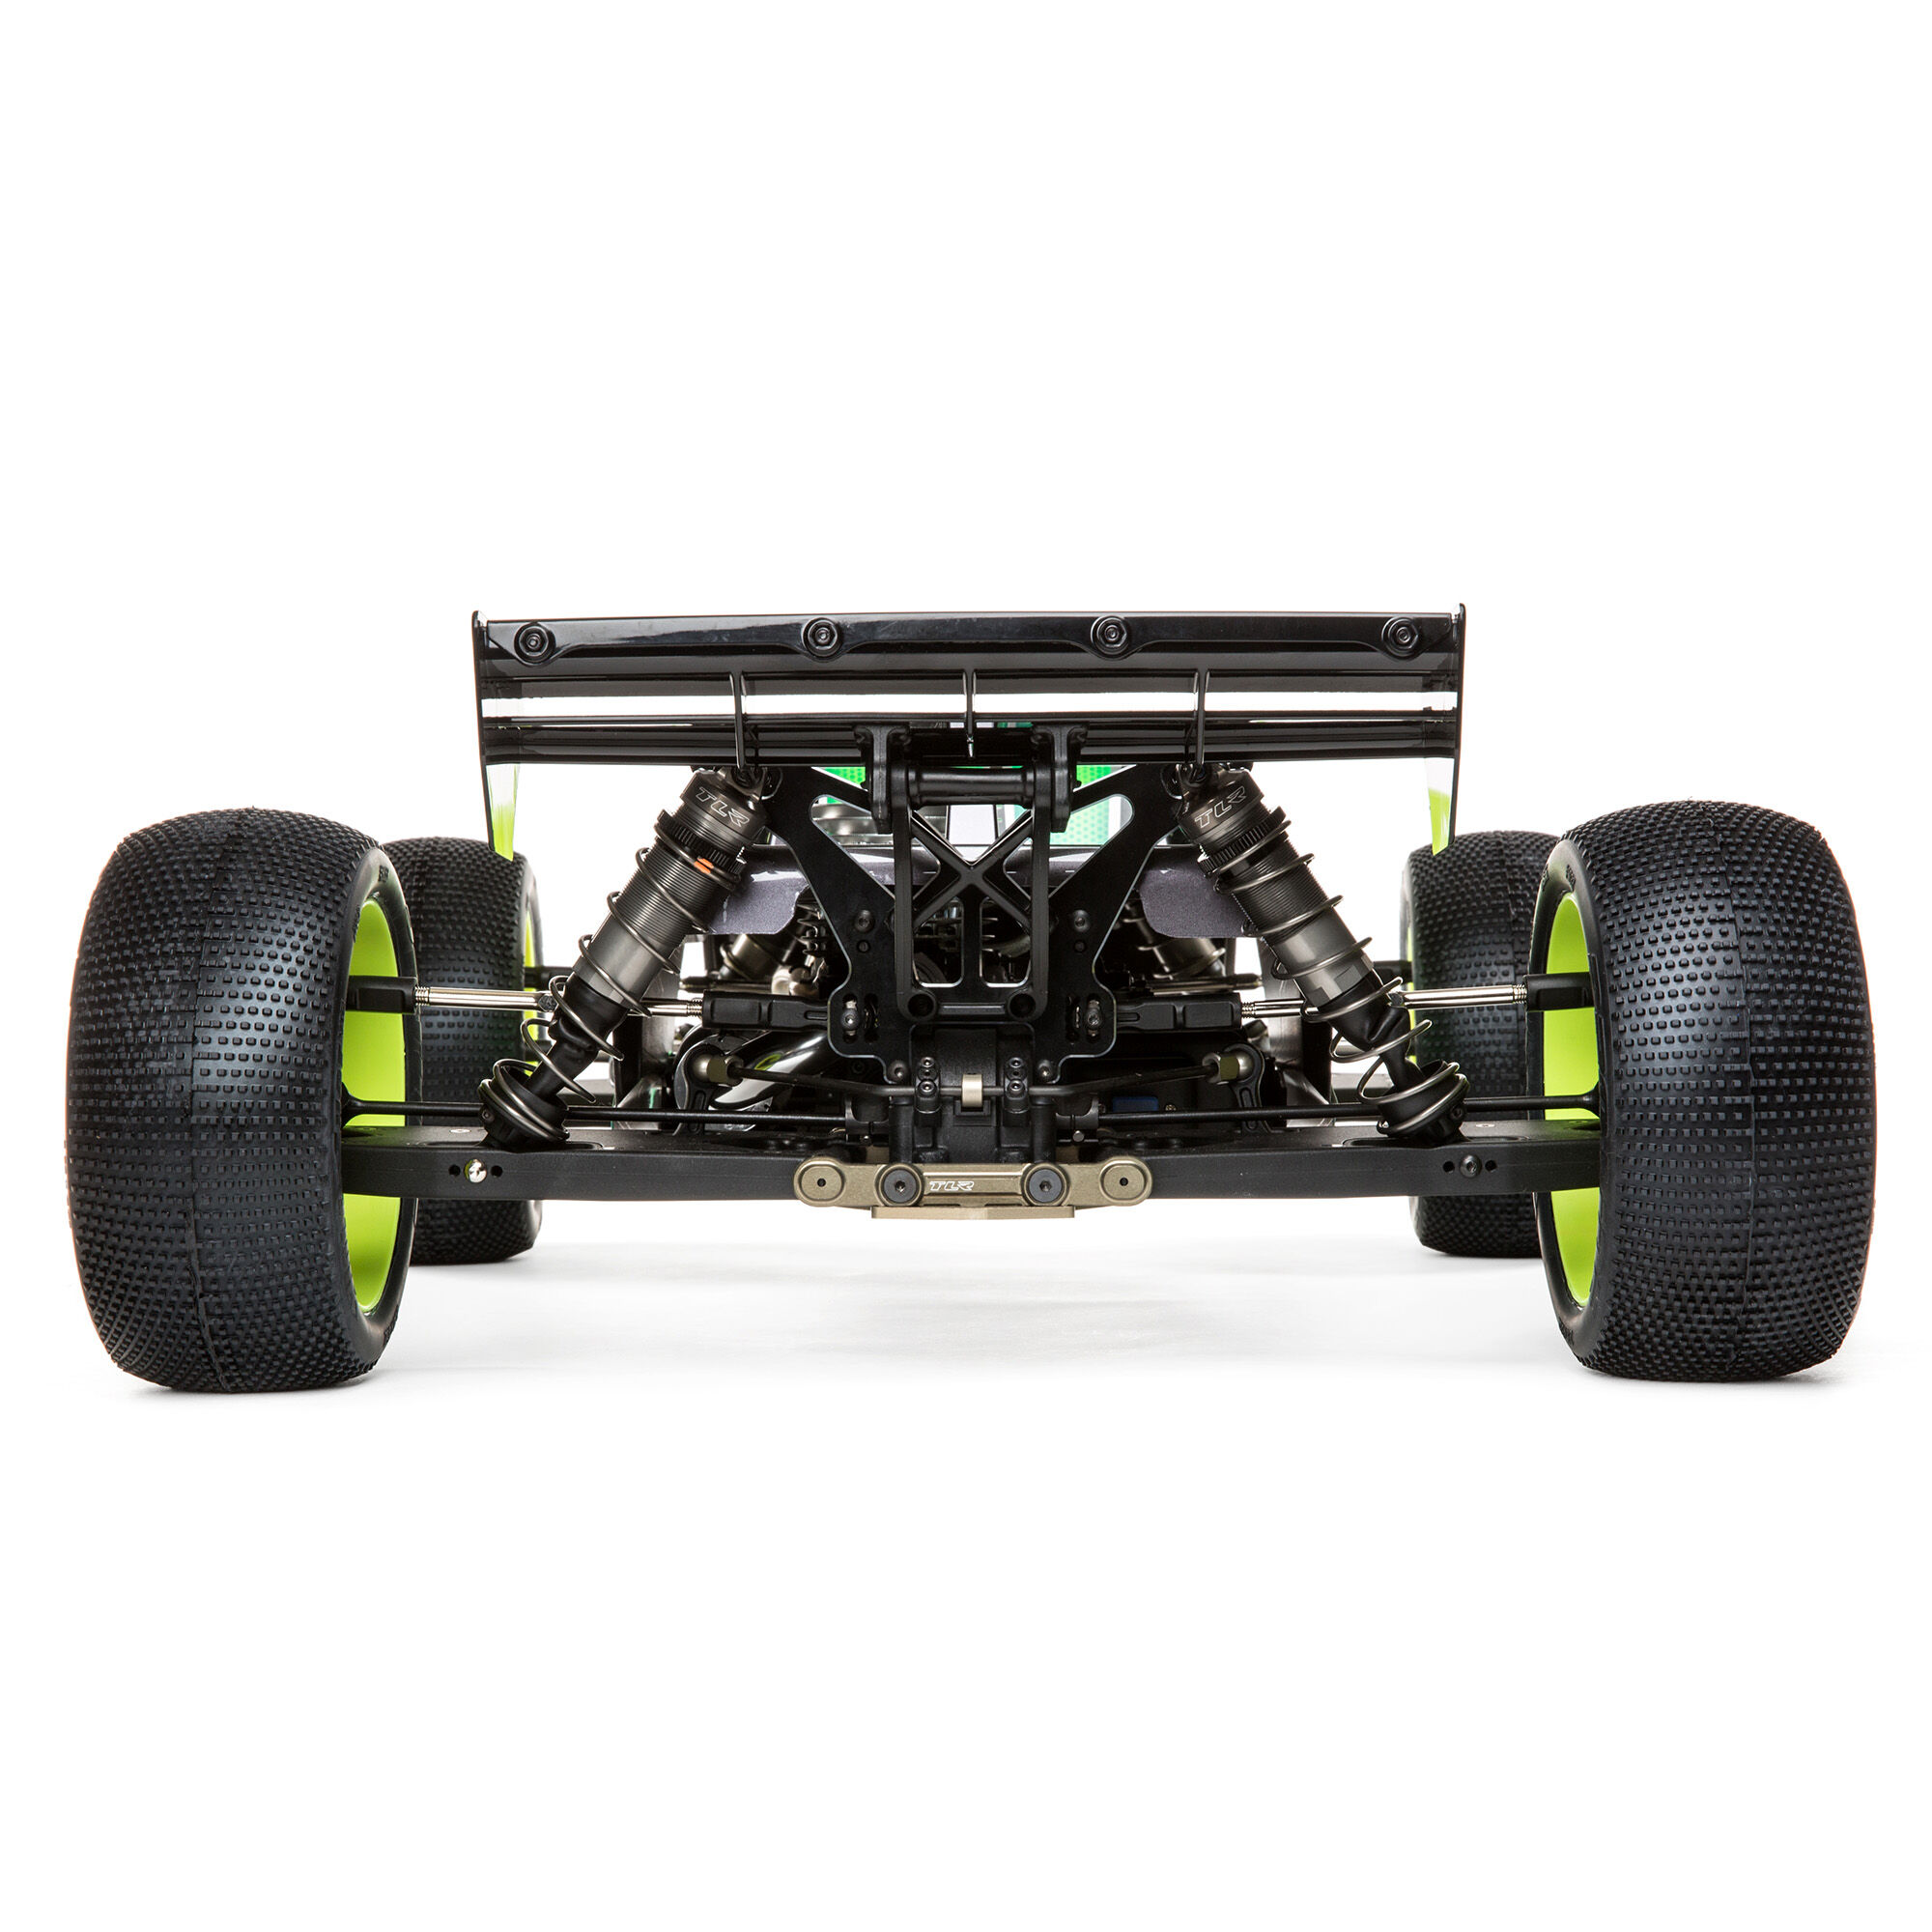 TRUGGY BODY FOR LOSI MINI 8IGHT 8 EIGHT TLR BUGGY CHASSIS